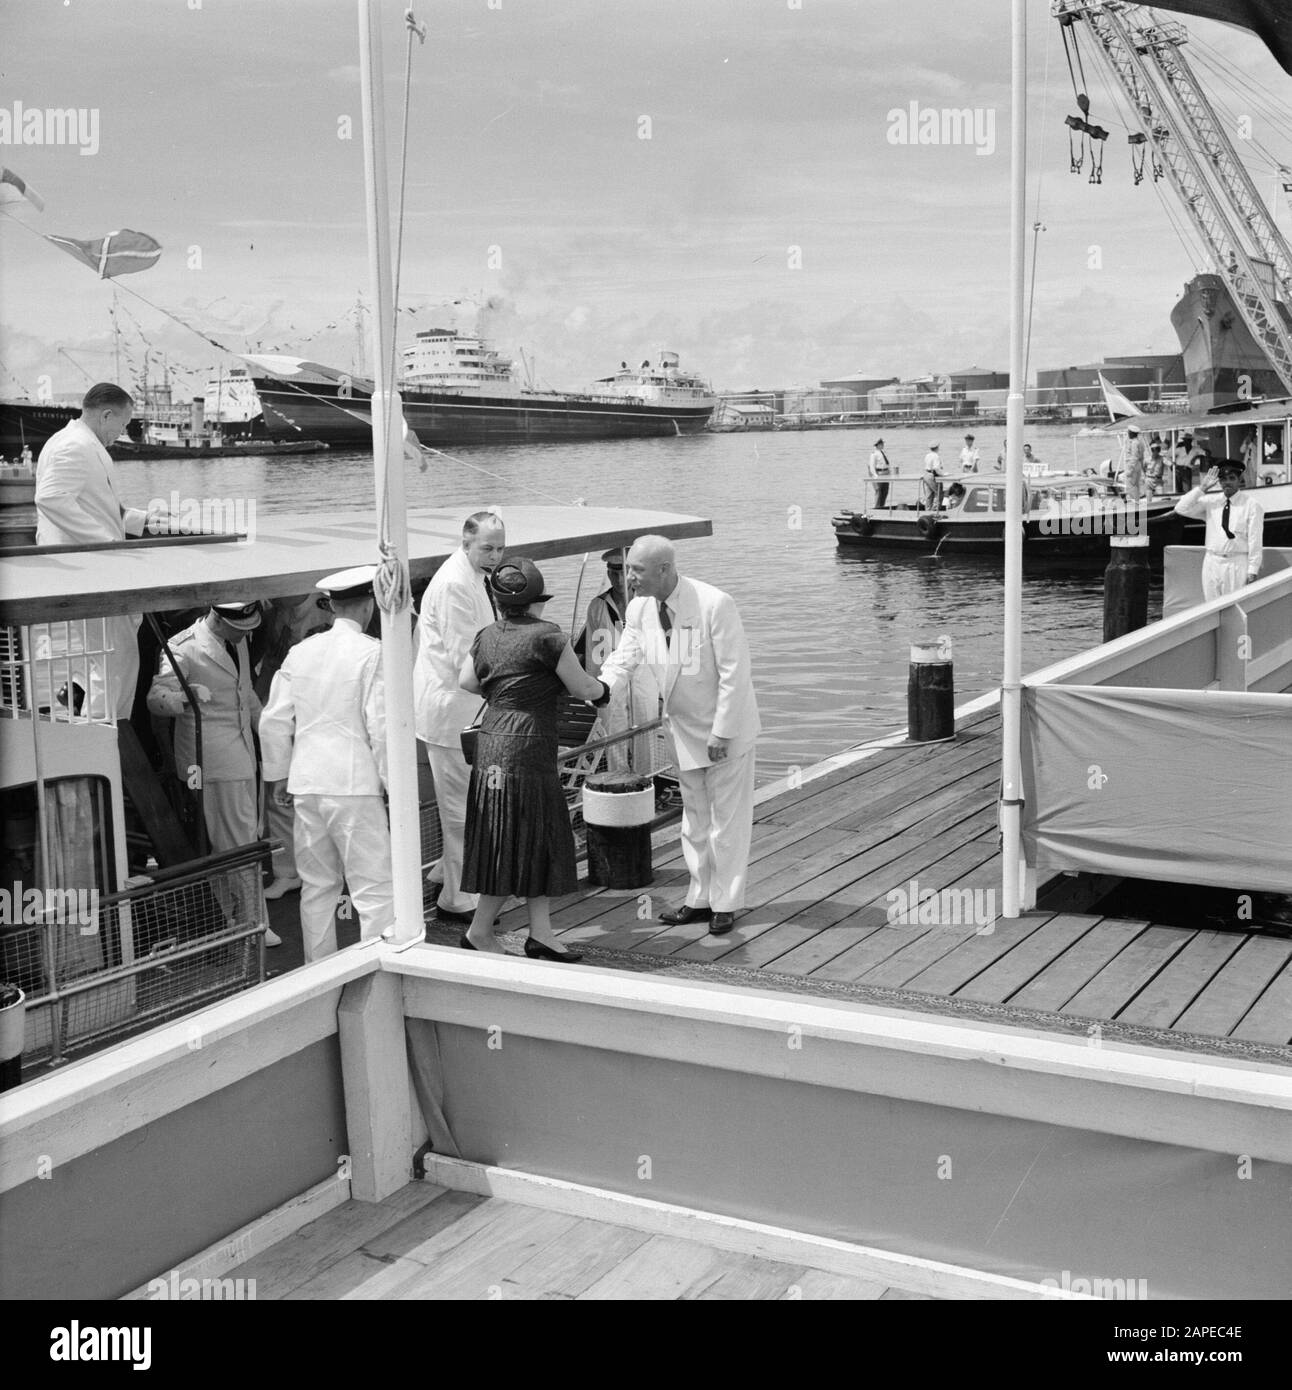 Netherlands Antilles and Suriname at the time of the royal visit of Queen Juliana and Prince Bernhard in 1955 Description: Greeting of Queen Juliana at the dock of the Isla refinery in Willemstad by Dr. Ir. H. ter Meulen Date: 21 October 1955 Location: Curaçao, Netherlands Antilles, Willemstad Keywords: royal visits, ships Personal name: Bernhard, prince, Juliana, queen, Meulen, H. ter Institution name: CPIM Stock Photo